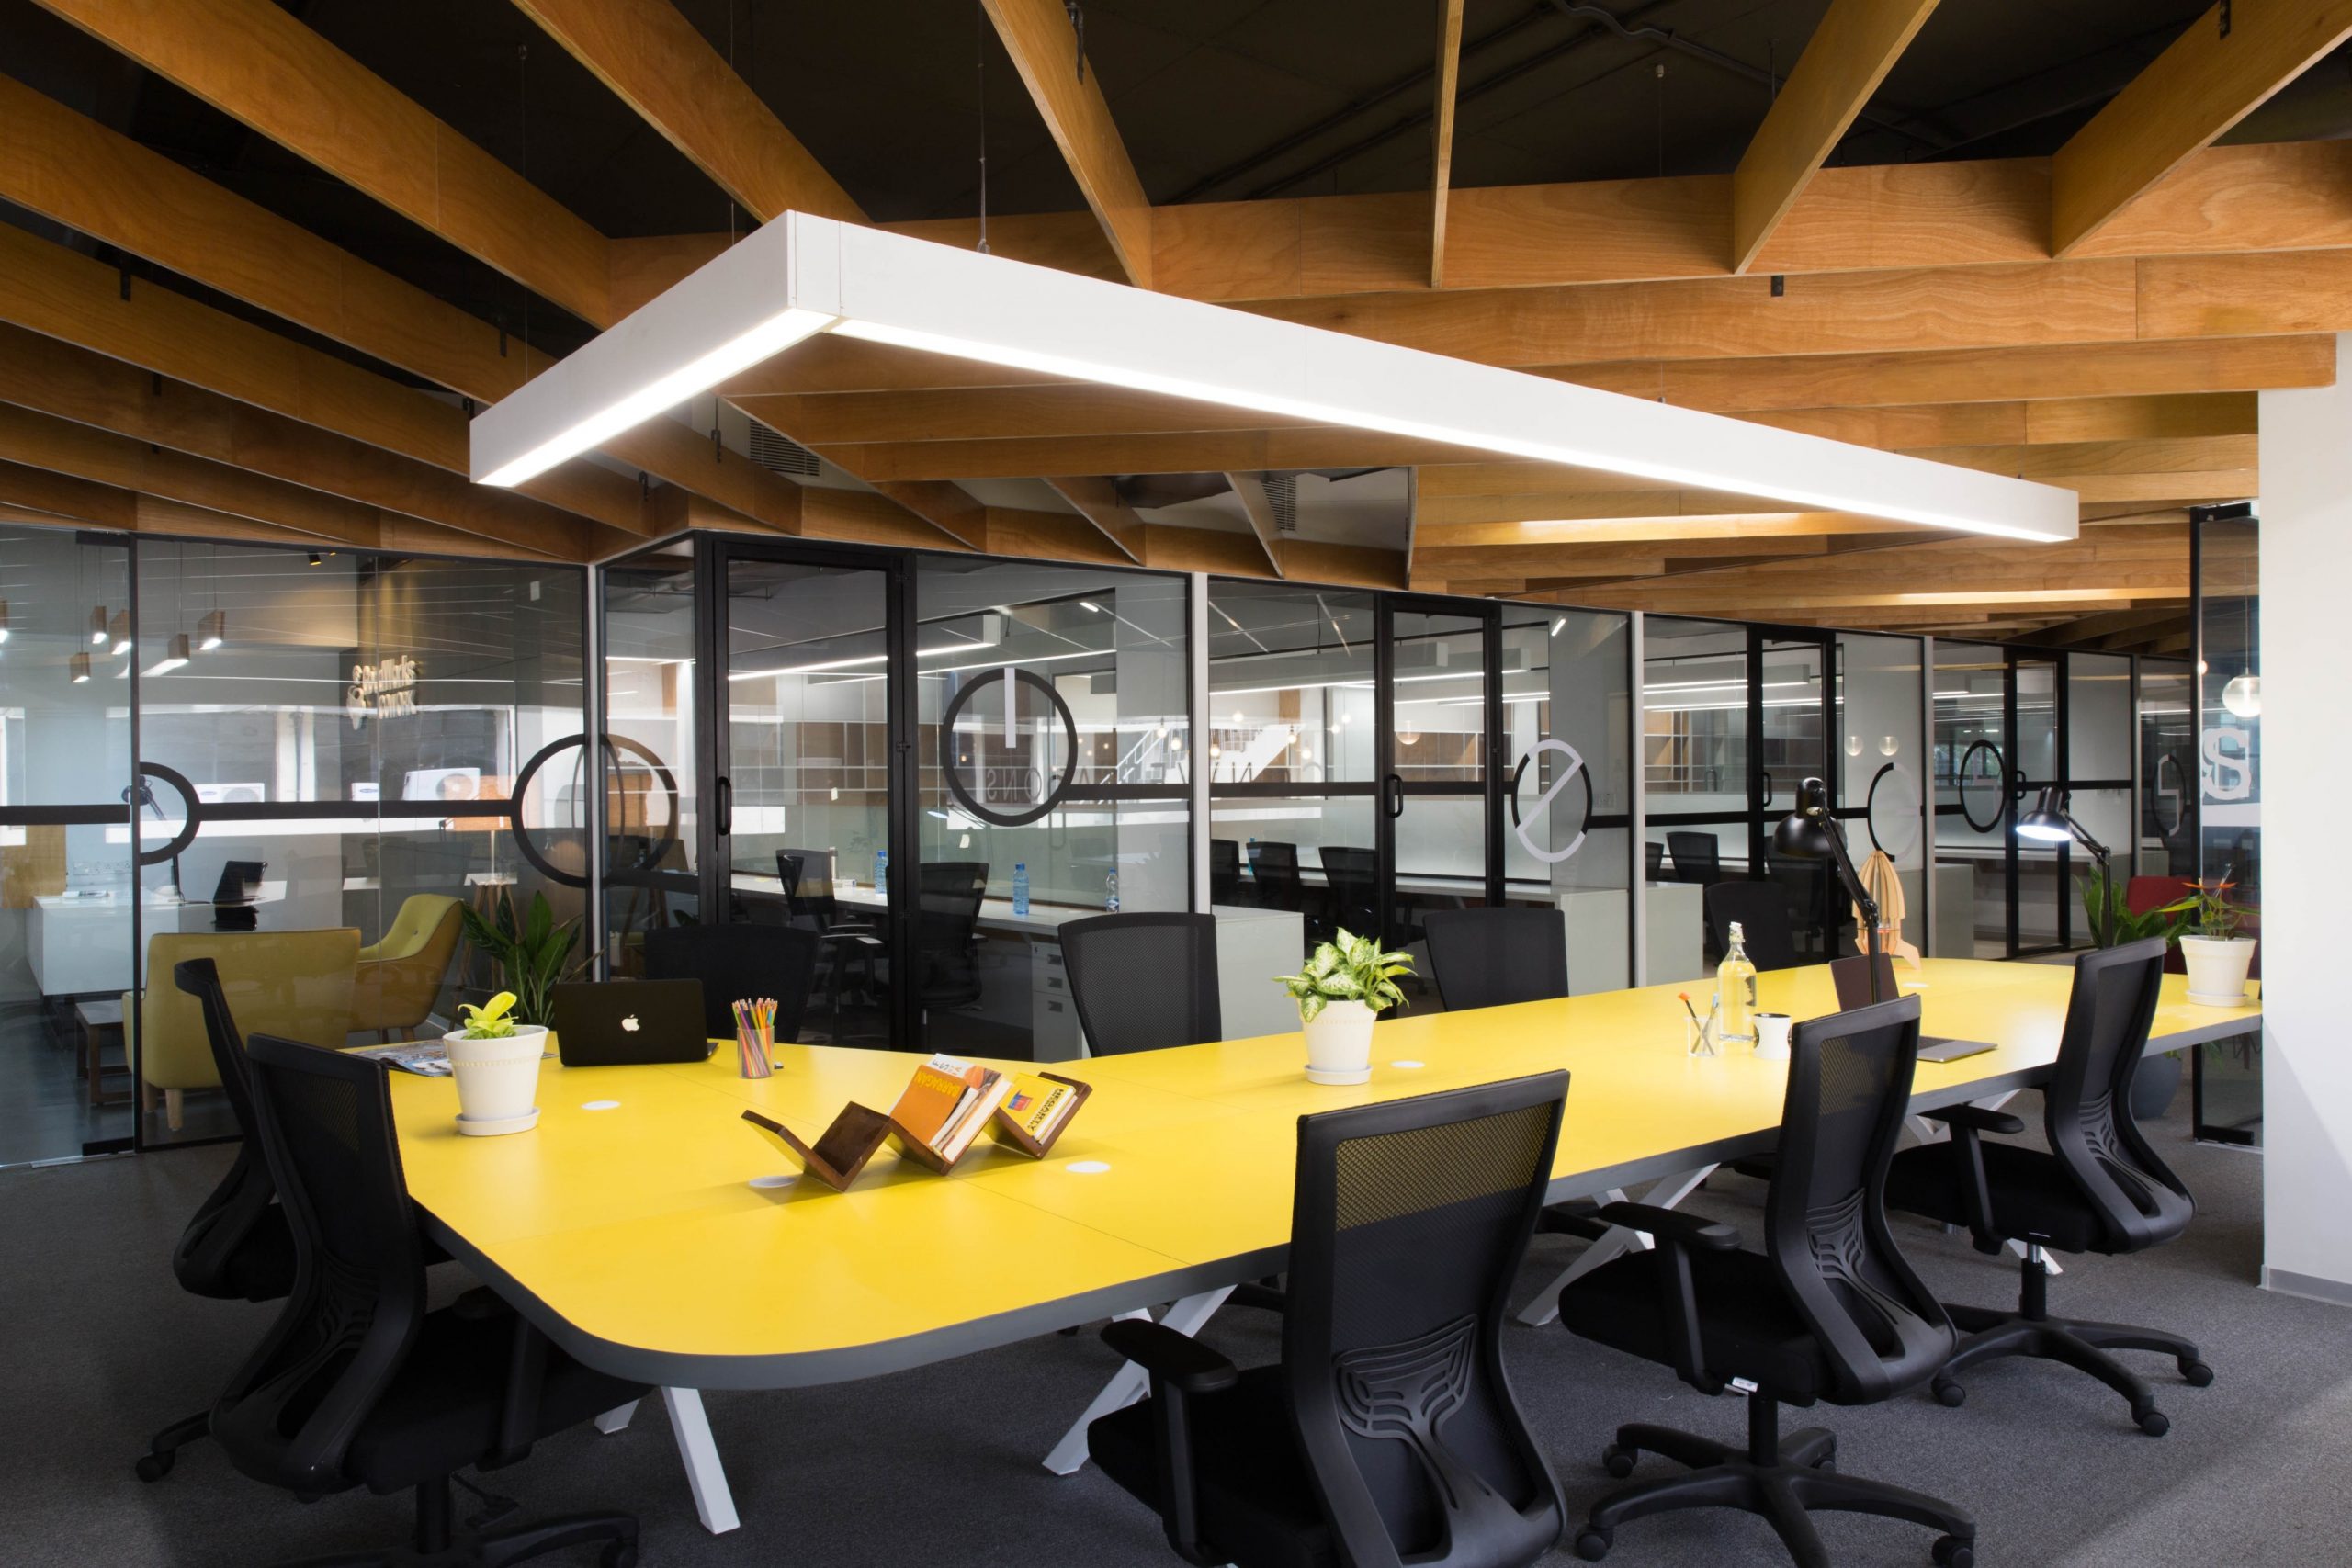 Which Are The Top Premium And Affordable Co-working Spaces In Bangalore